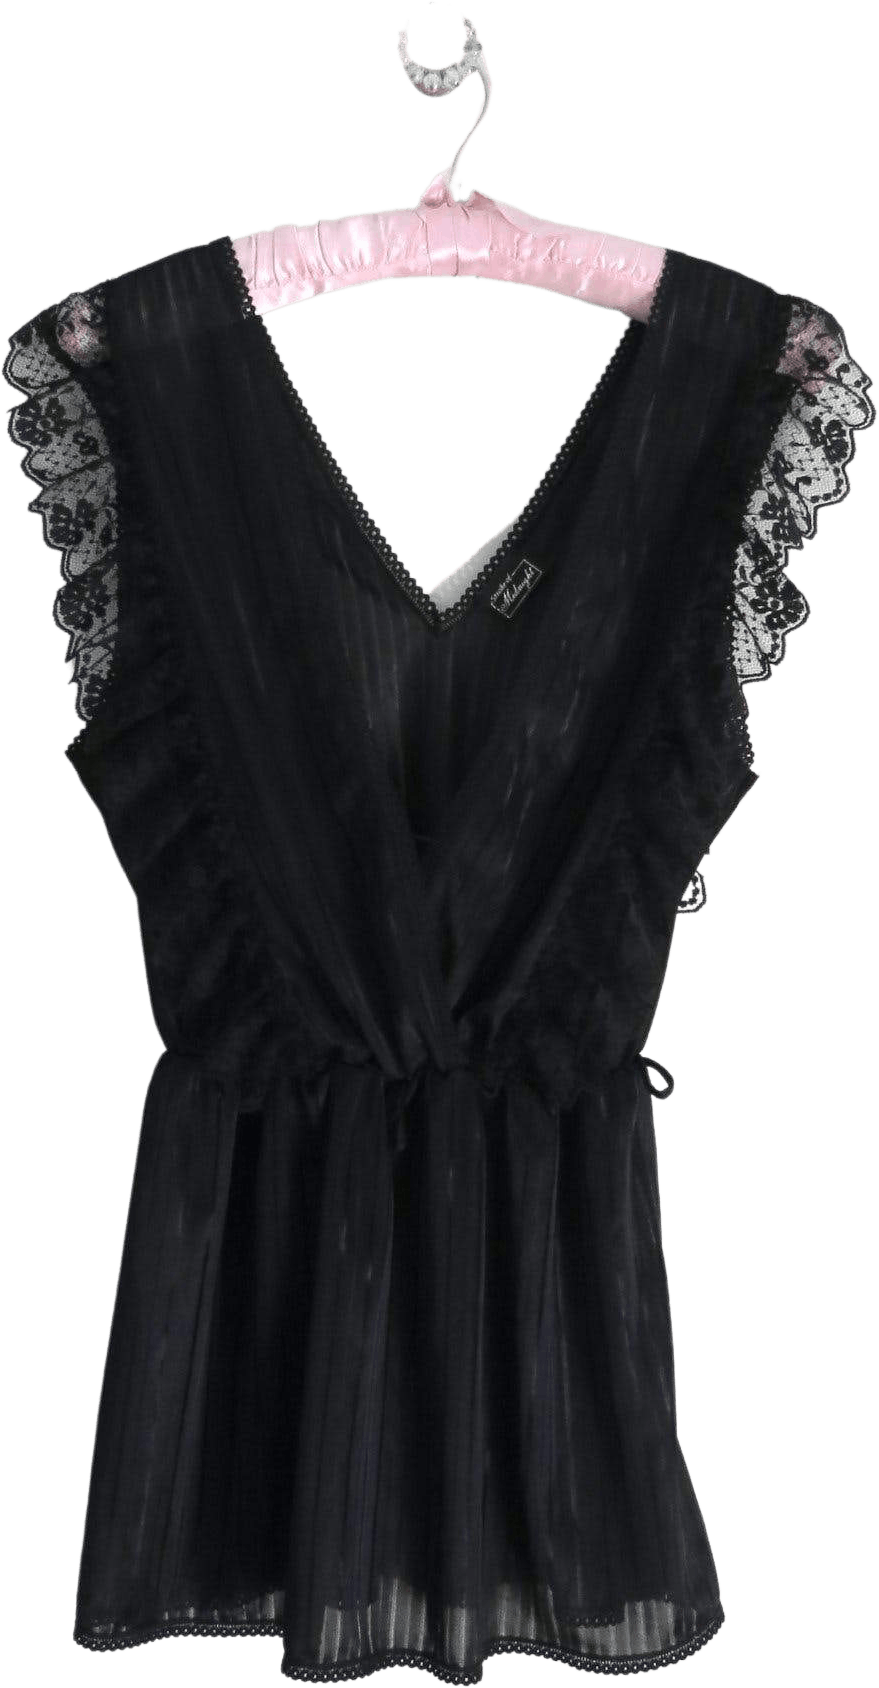 Vintage 80's Black Ruffle Babydoll Top by Stroke of Midnight | Shop ...